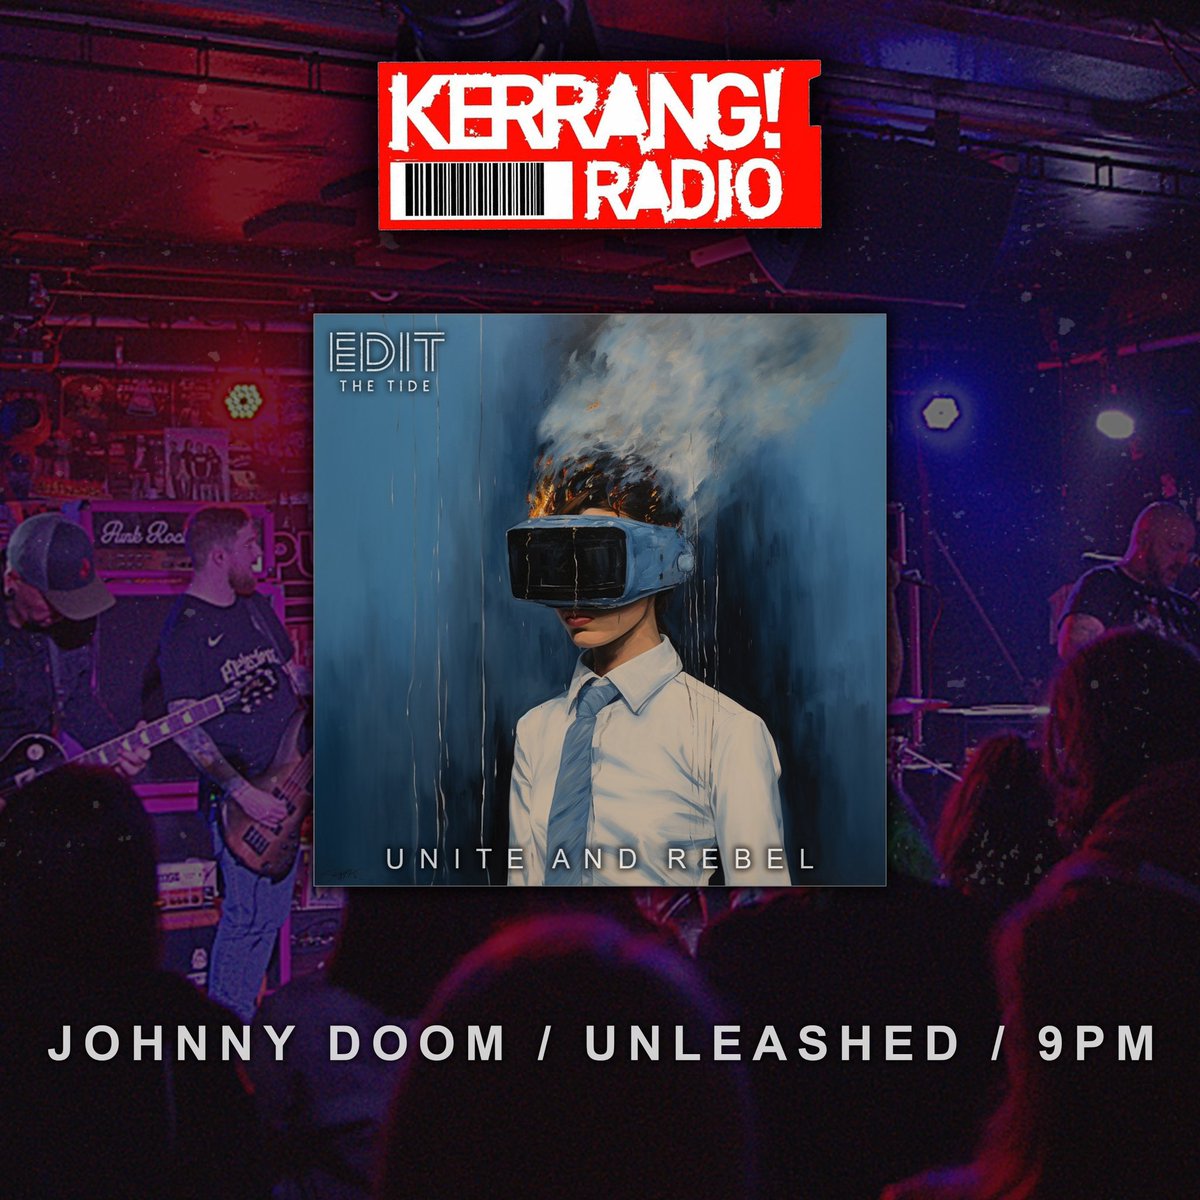 Tune in to @KerrangRadio tonight from 9pm where @johnnydoom will be playing ‘Unite And Rebel’ on the Unleashed Show! 🔥 Thanks for the continued support Johnny! 👊🏻 #kerrang #kerrangradio #editthetide #radio